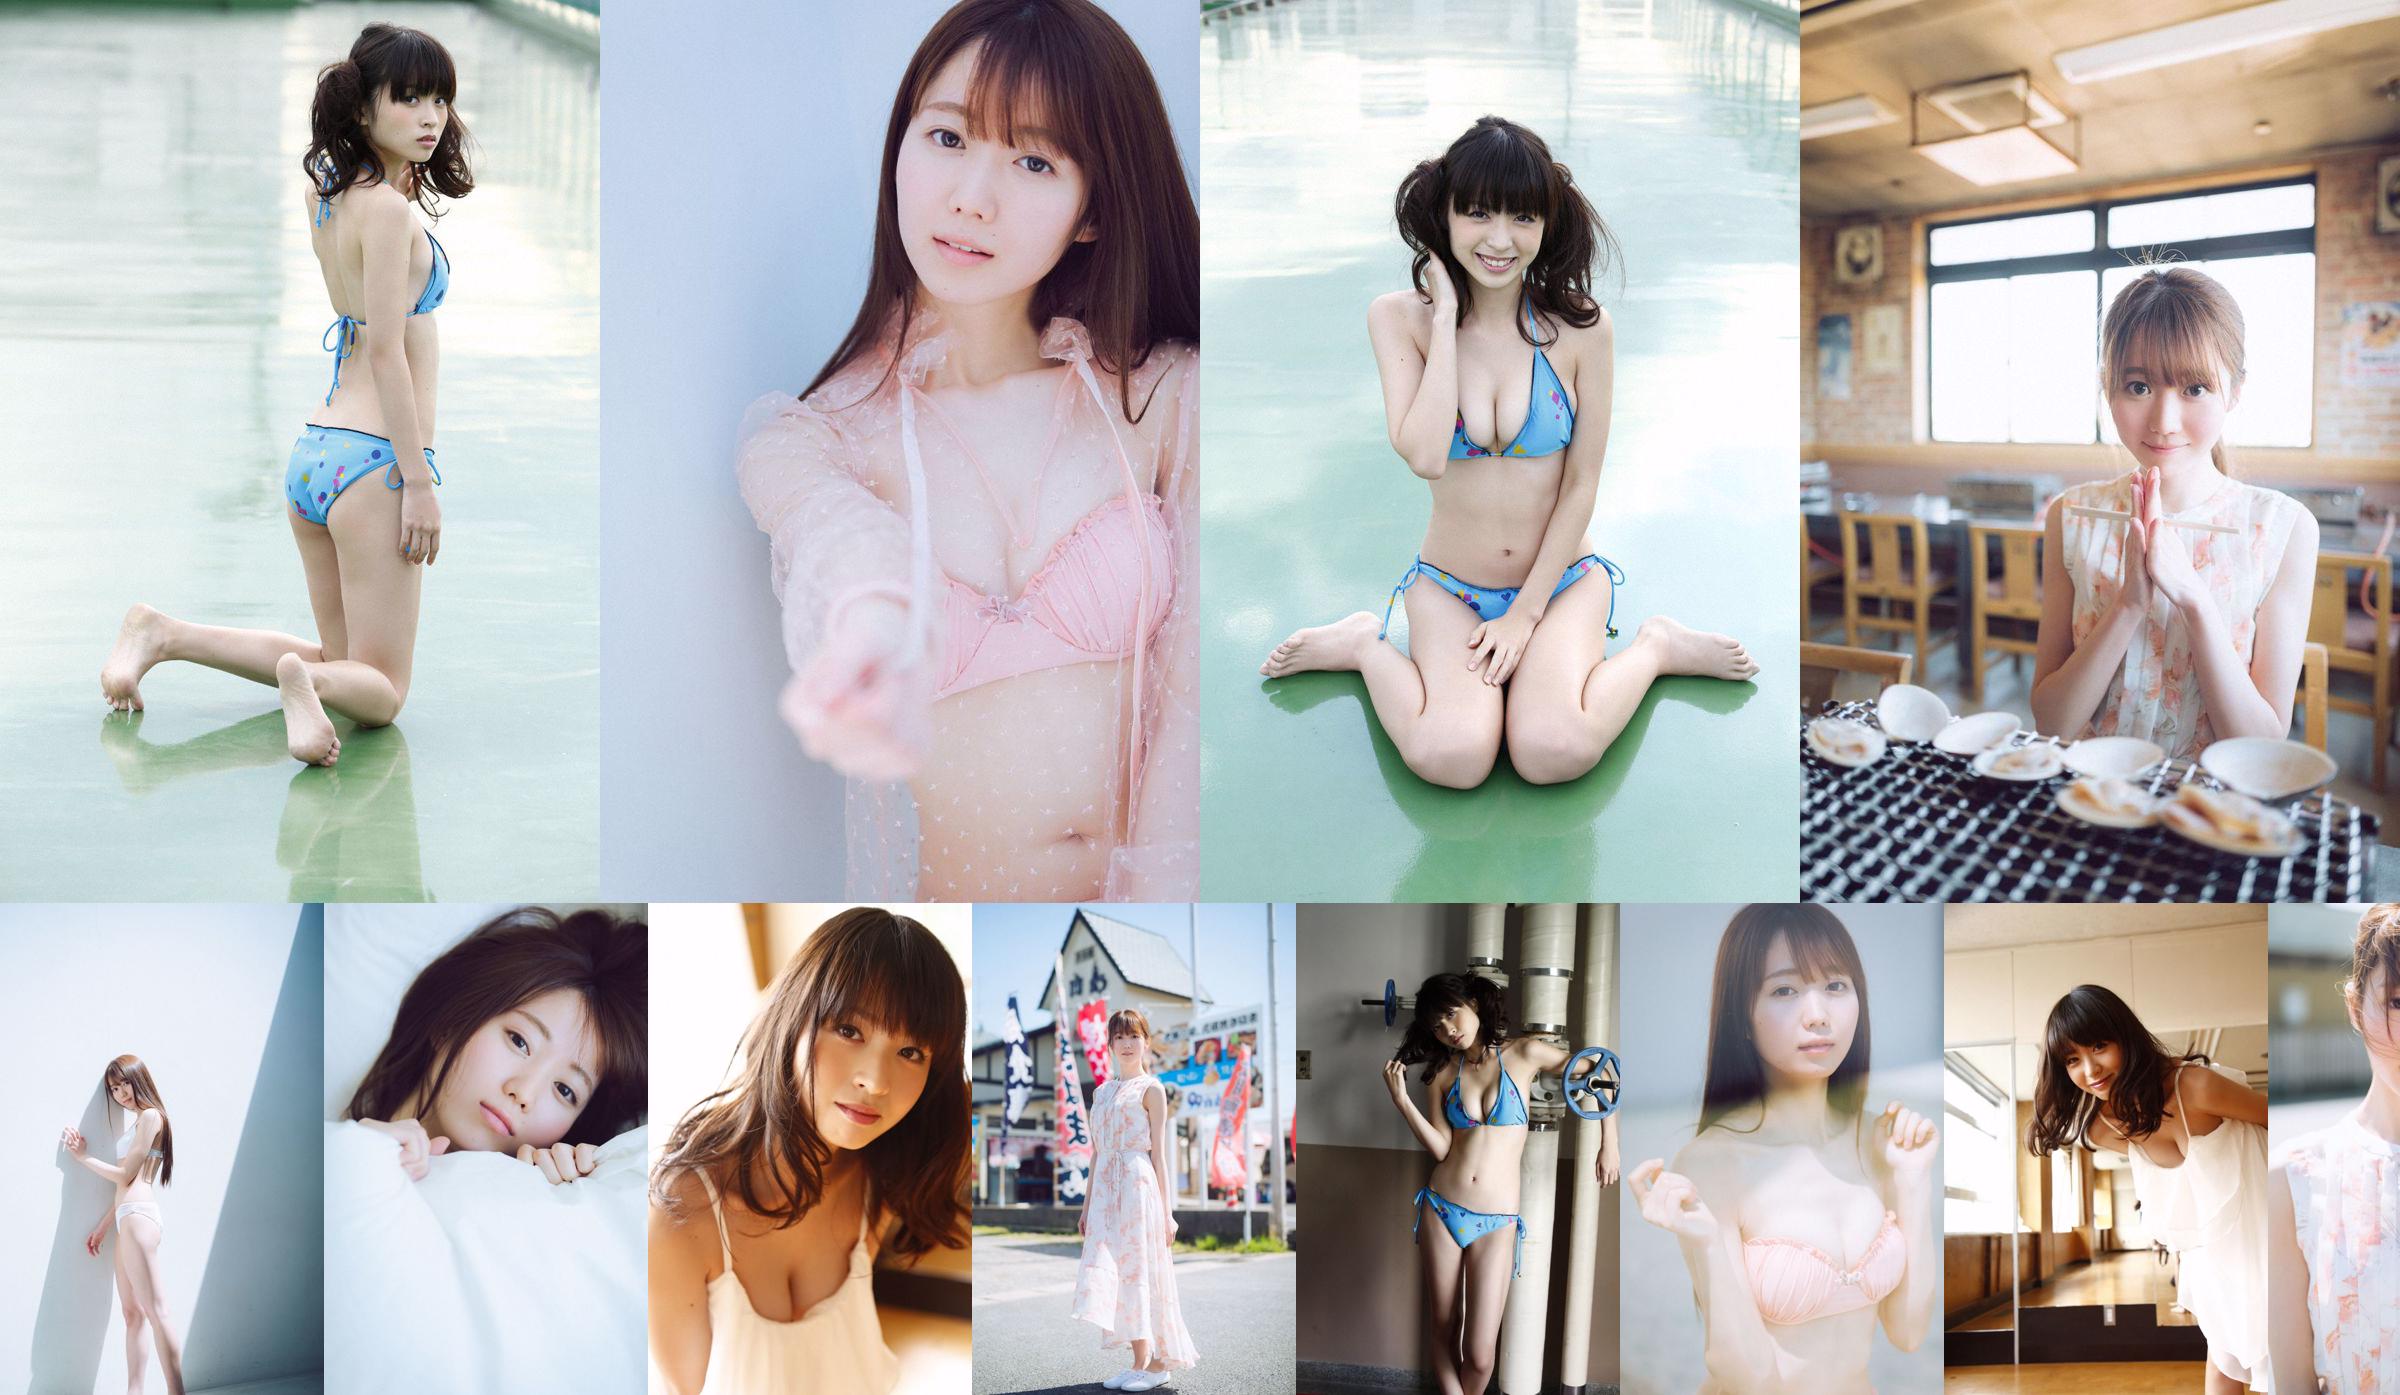 Emiri Otani "With you and two." [WPB-net] Extra734 No.d8ad04 Page 4